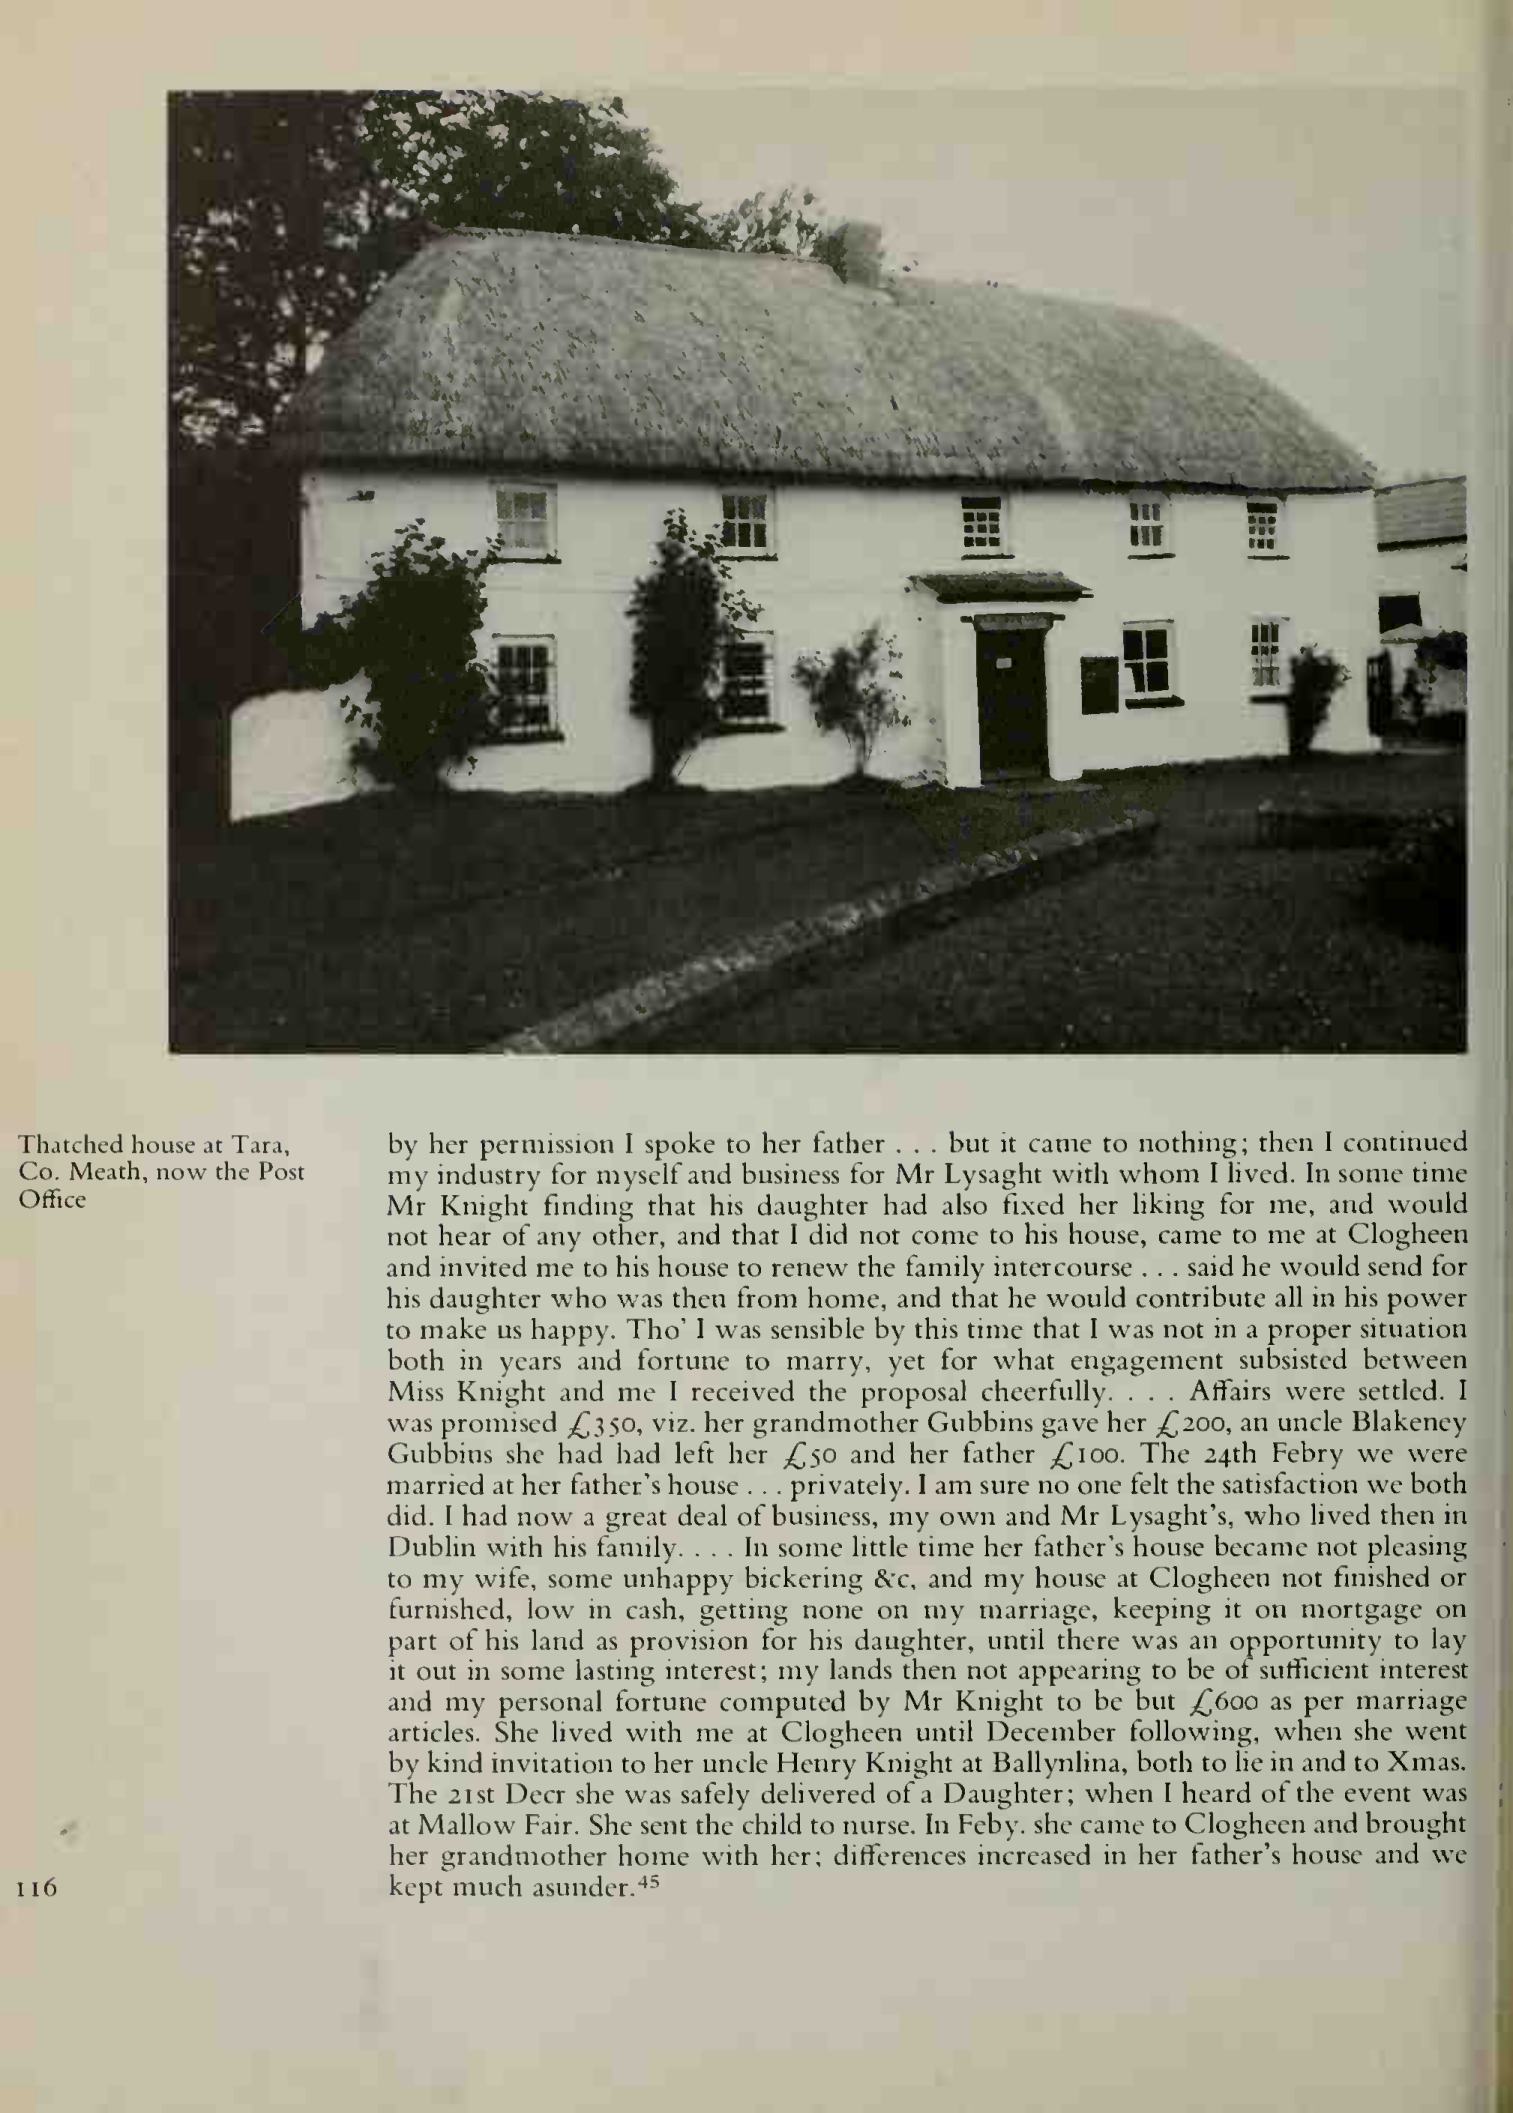 The Houses of Ireland : Domestic architecture from the medieval castle to the Edwardian villa / Brian de Breffny and Rosemary ffolliott ; Photographs by George Mott. — New York : The Viking Press, 1975